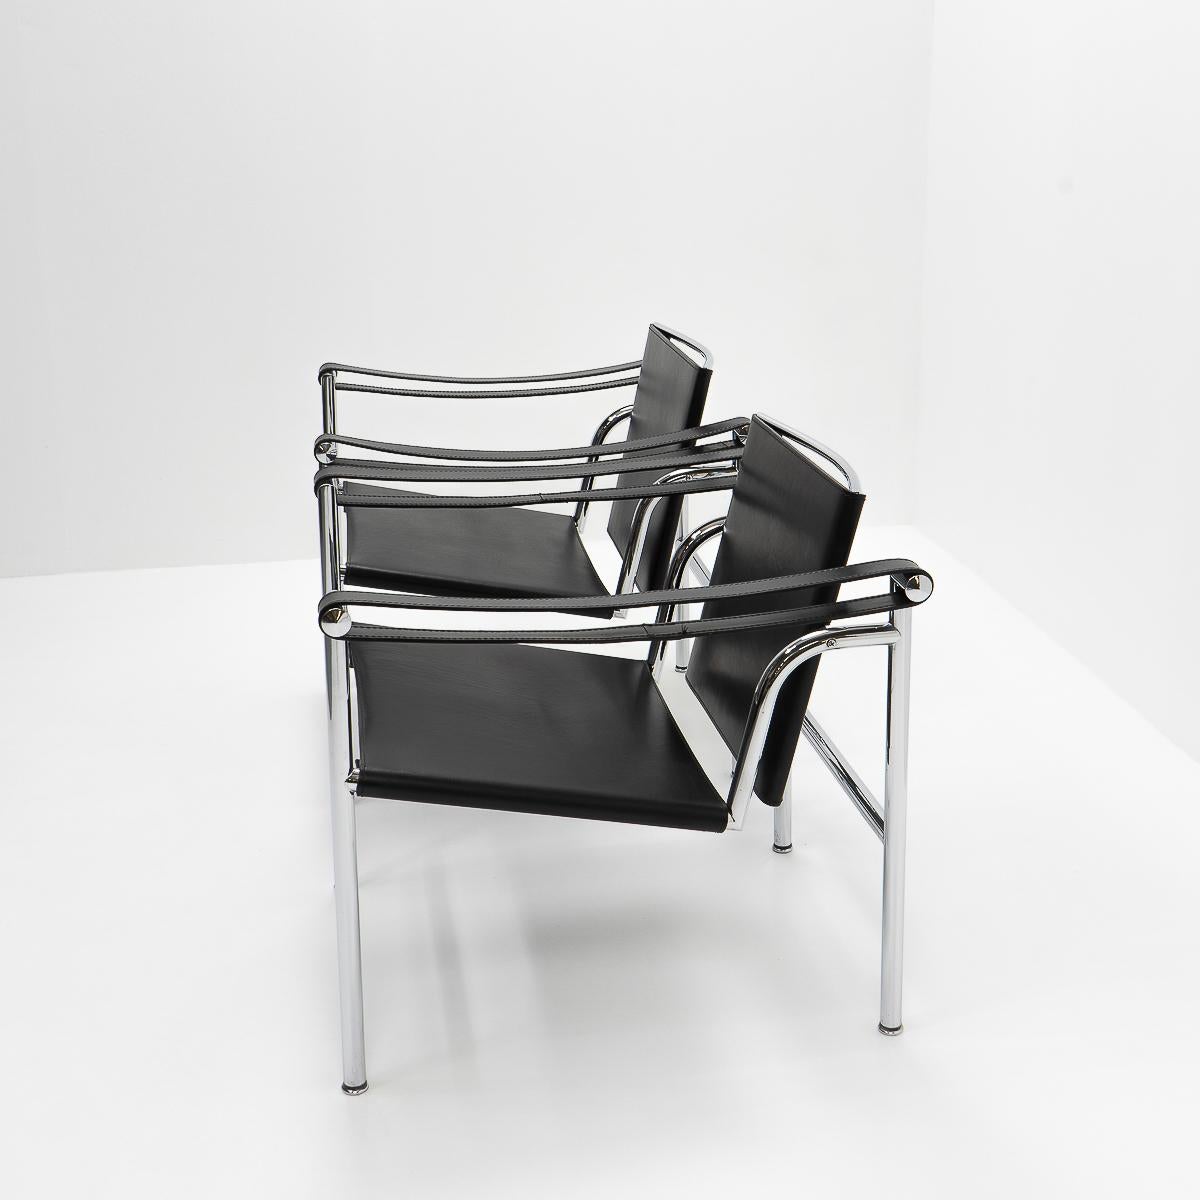 Late 20th Century Modernist Design LC1 Chairs by Le Corbusier, Jeanneret, Perriand for Cassina For Sale